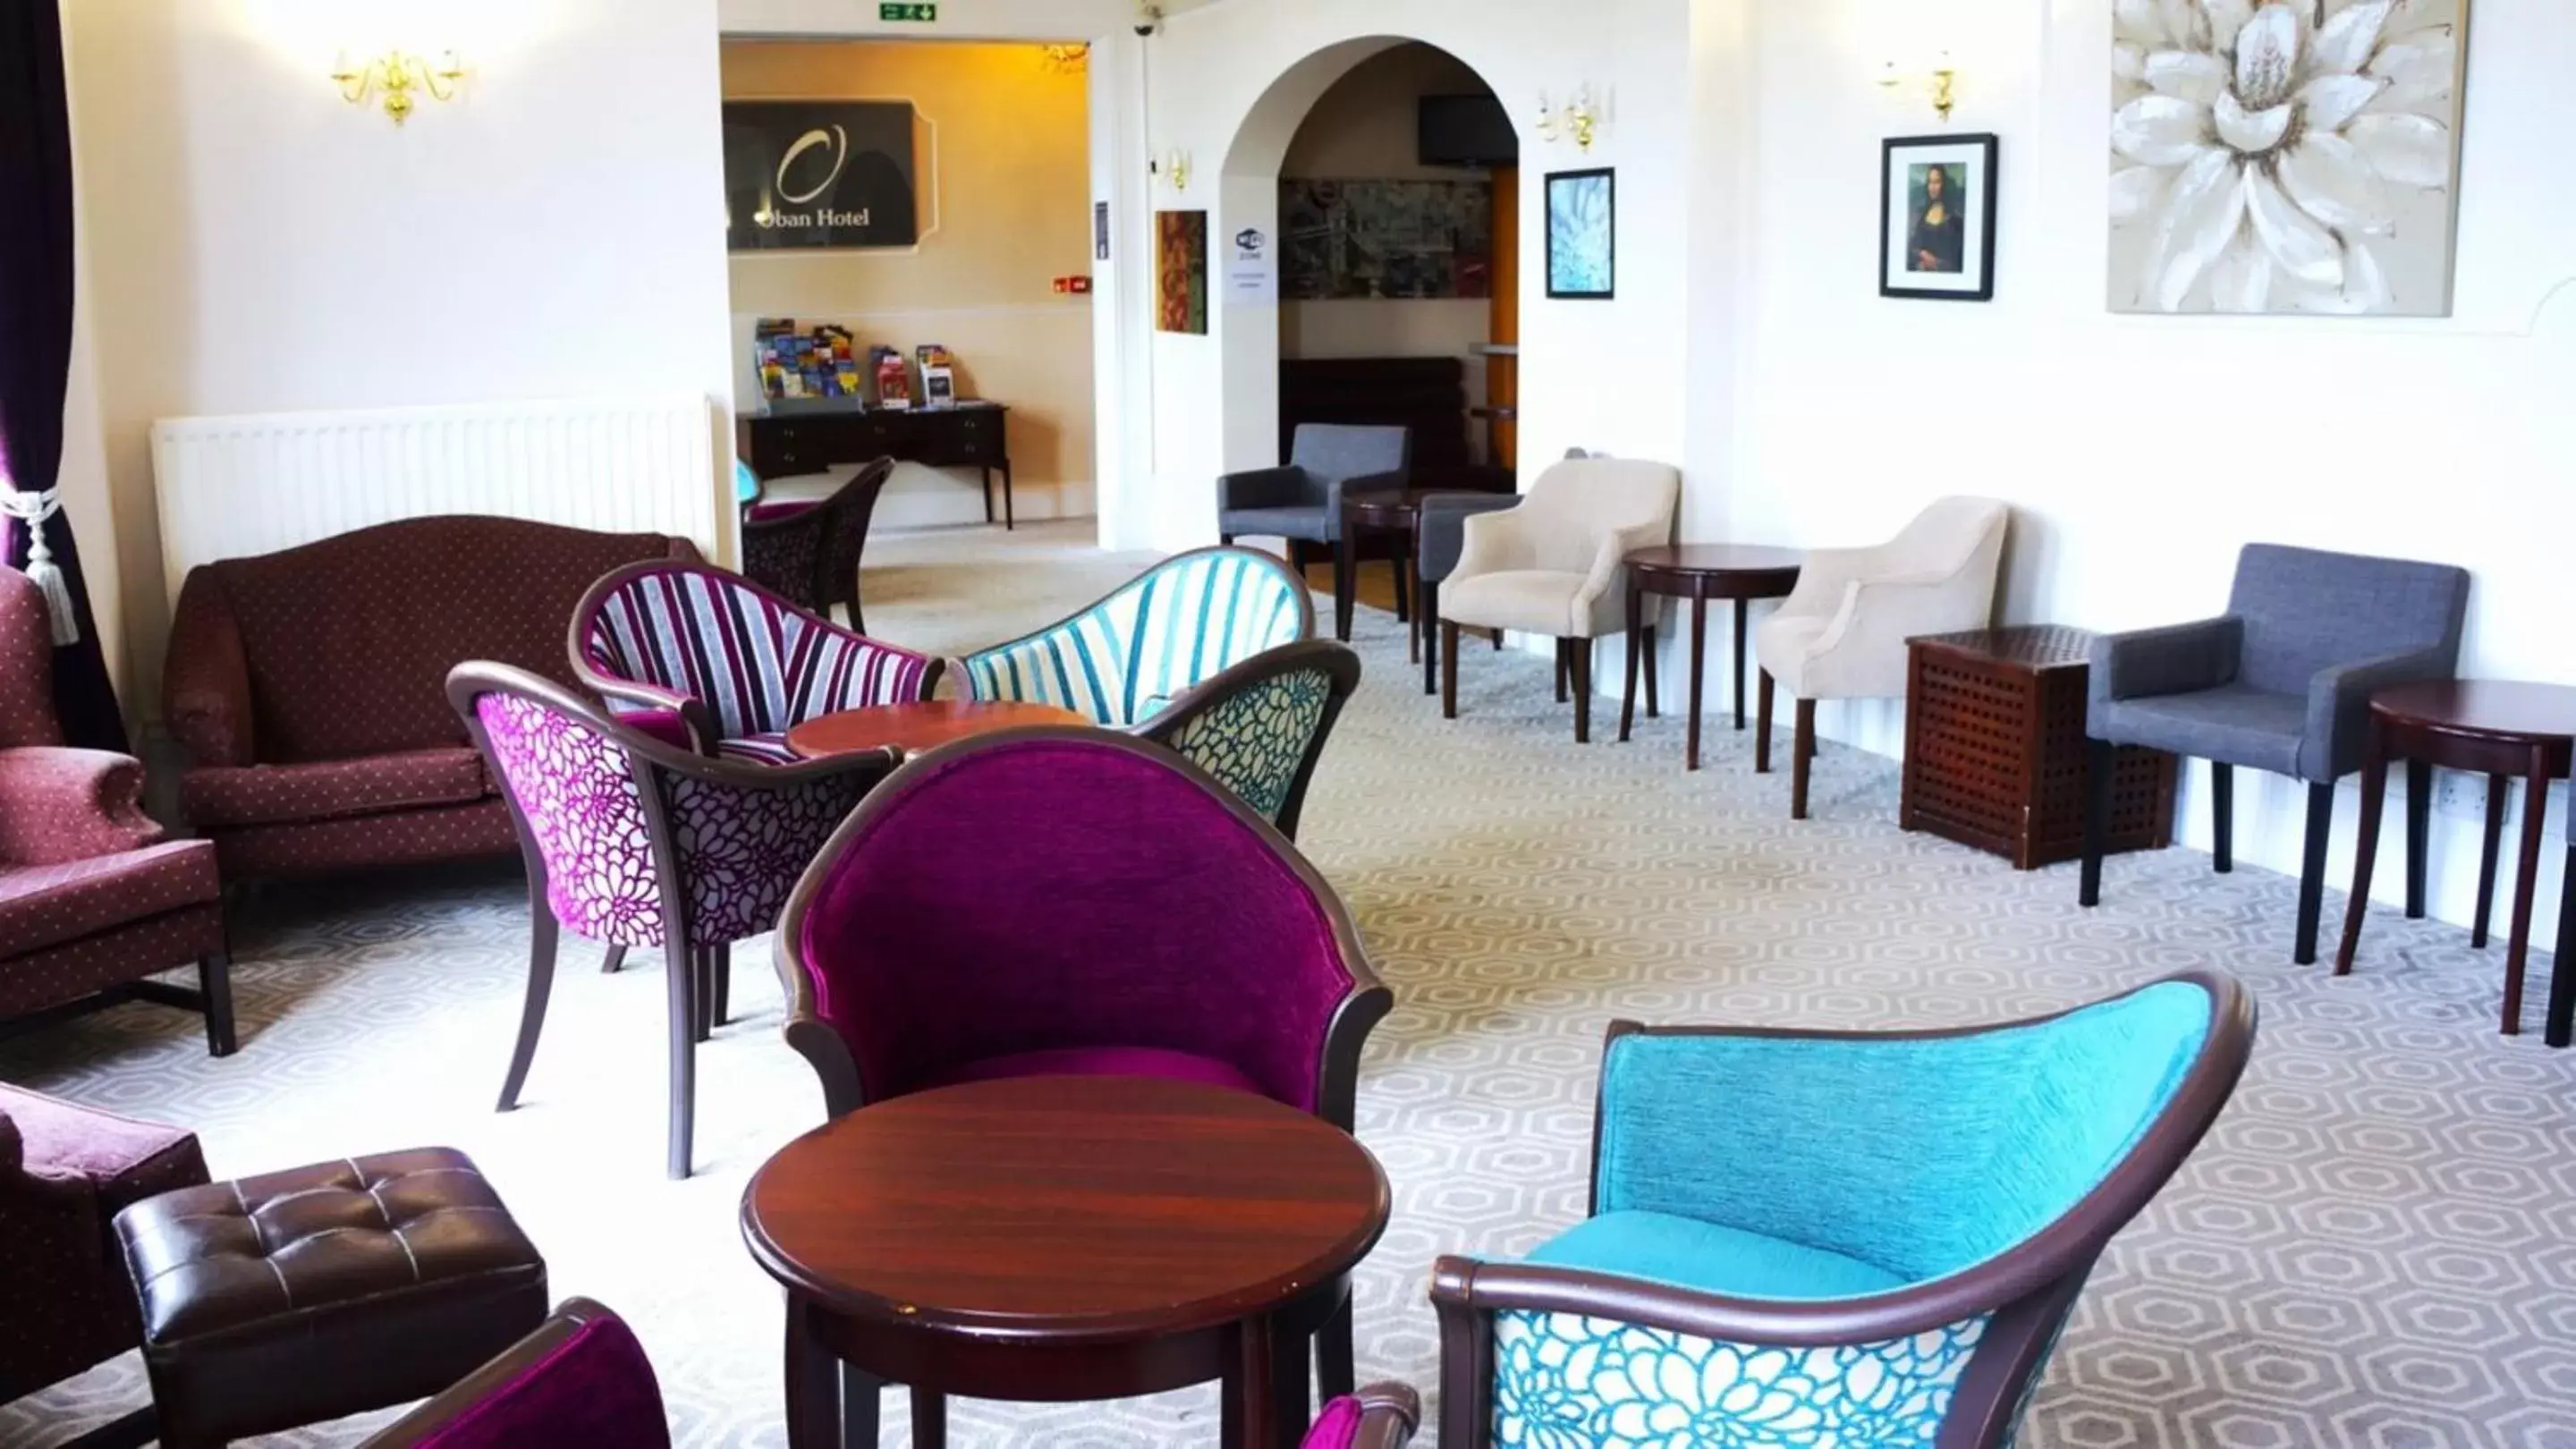 Seating area in OYO Oban Hotel